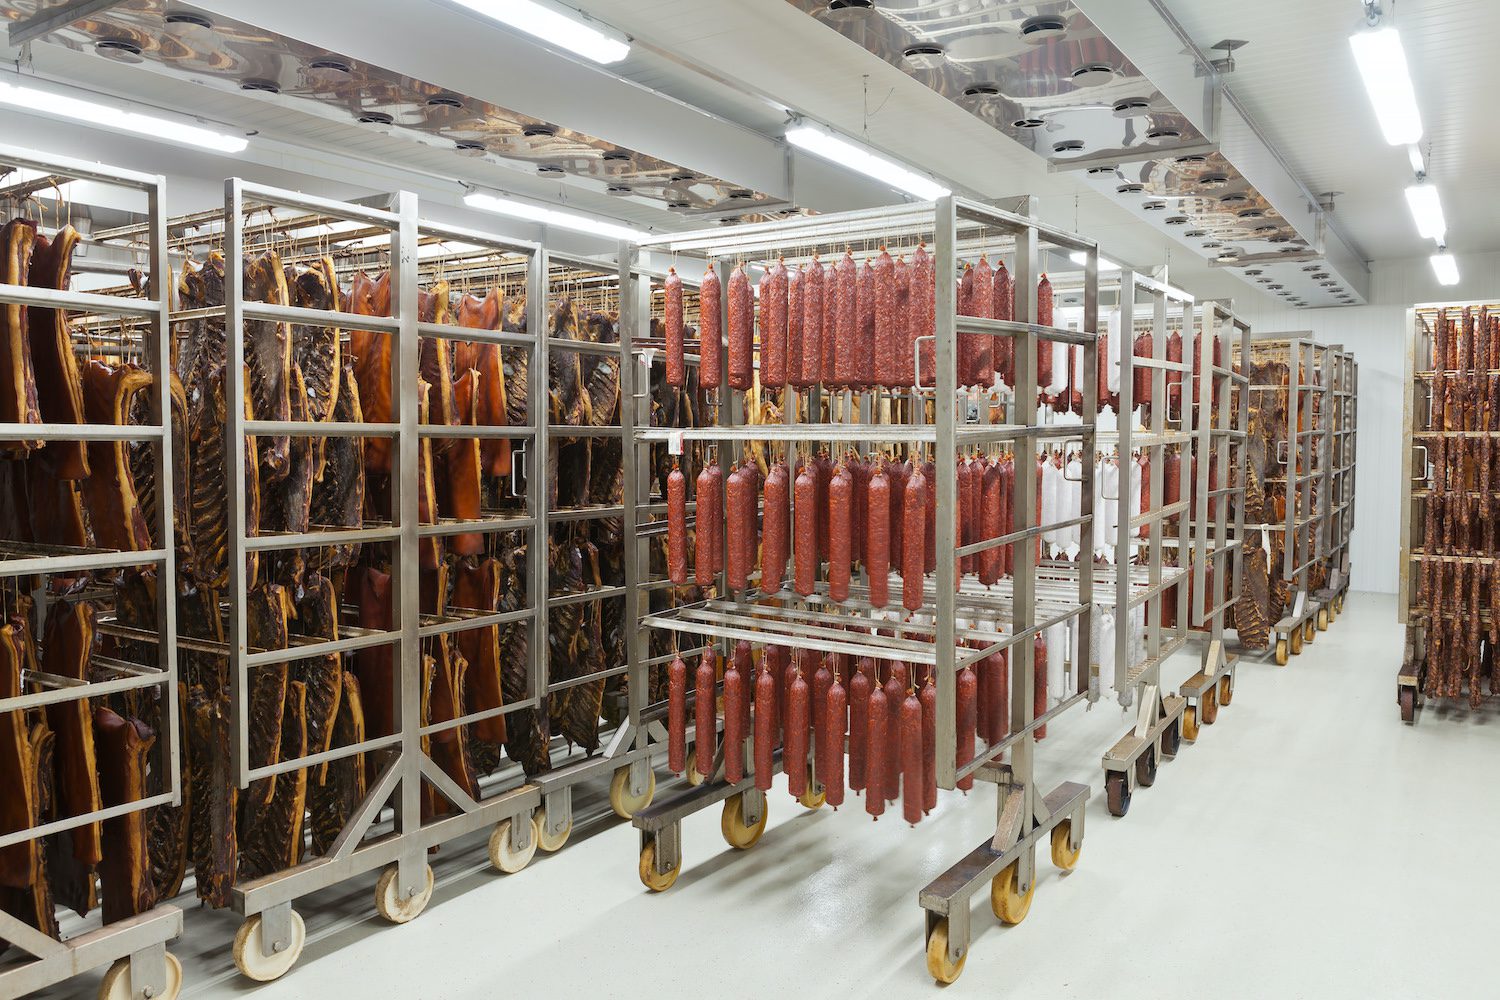 Salami in production